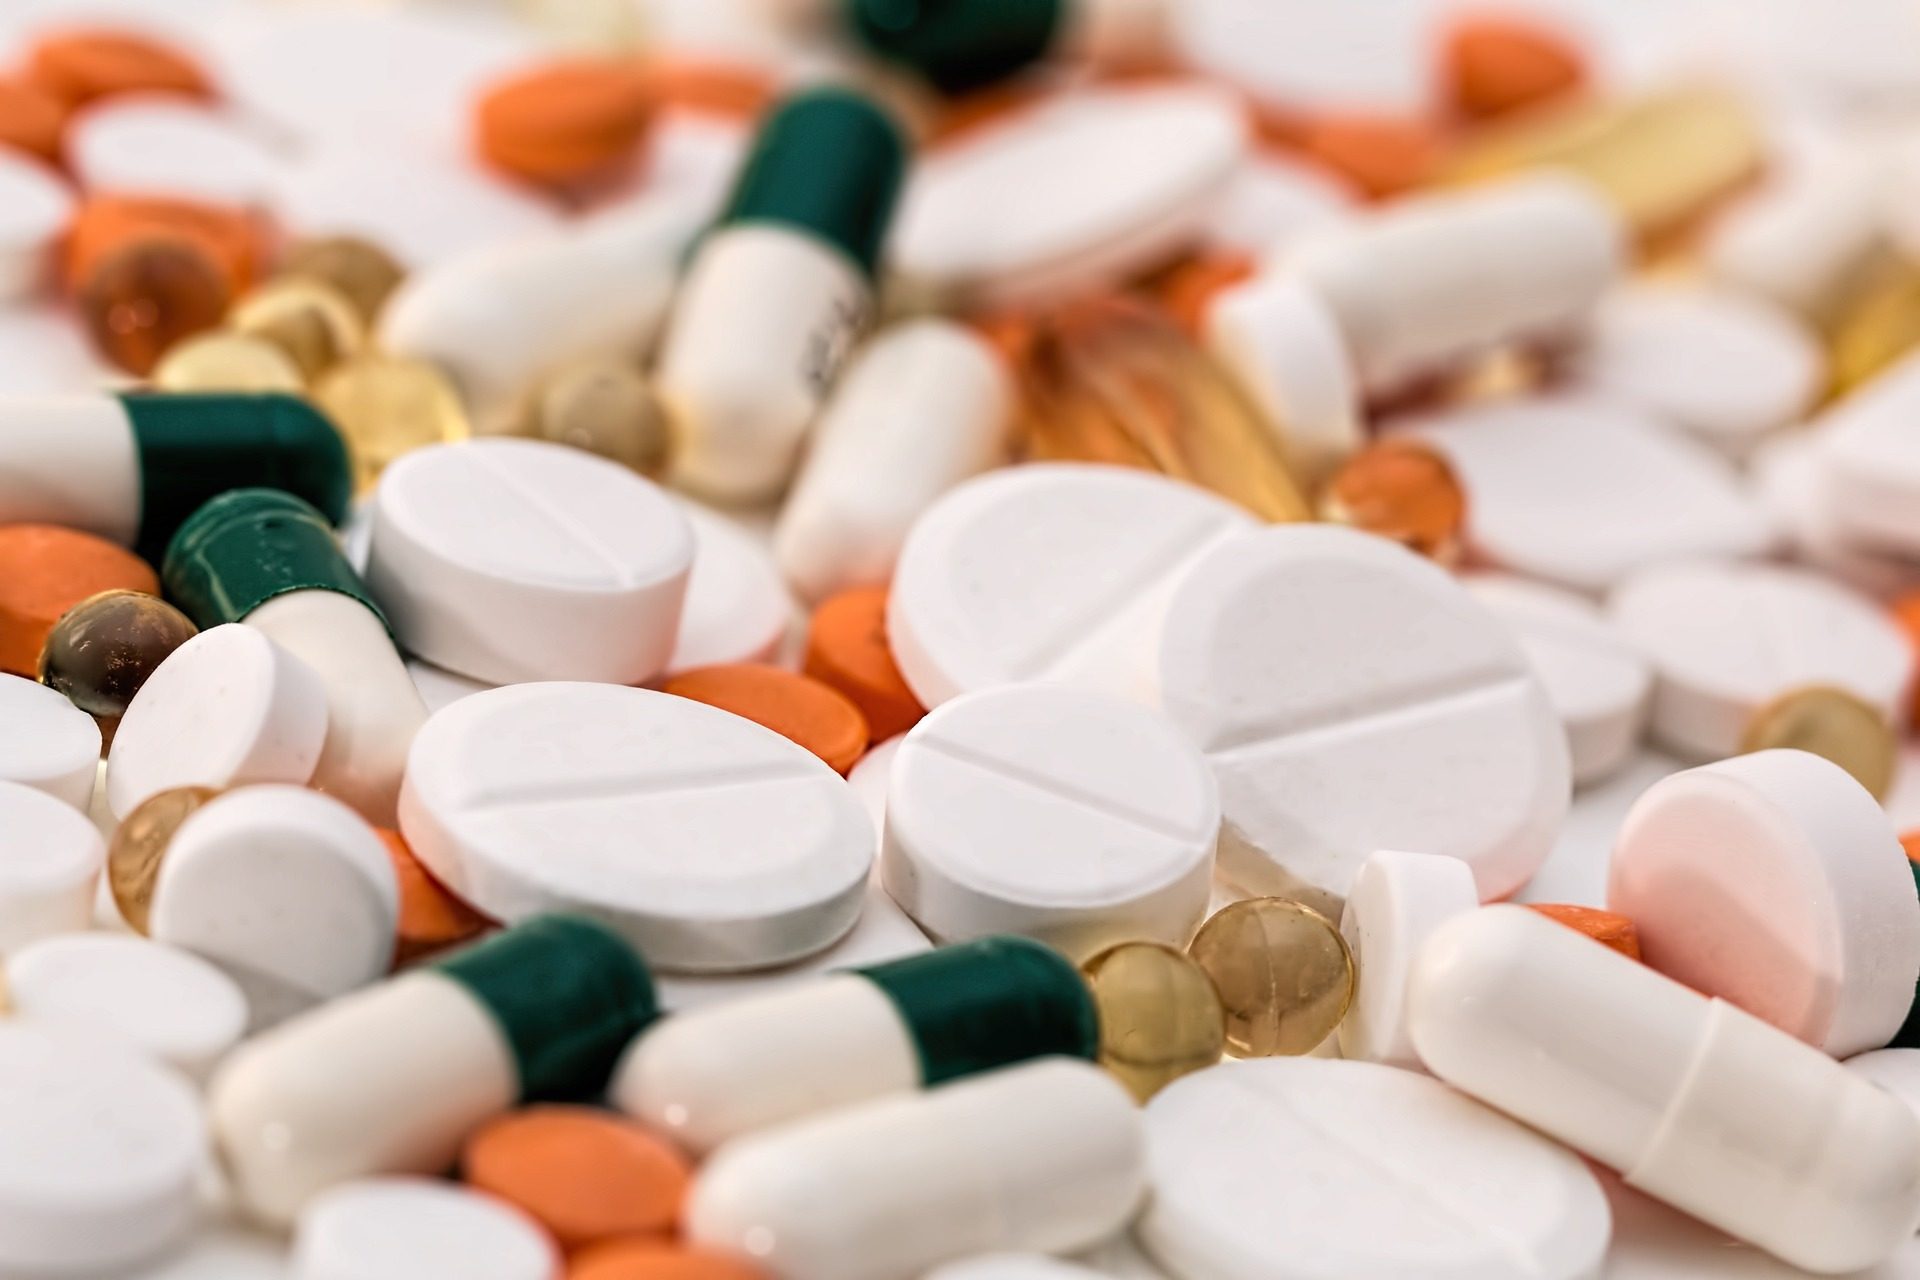 Top 10 Most Abused Prescription Drugs